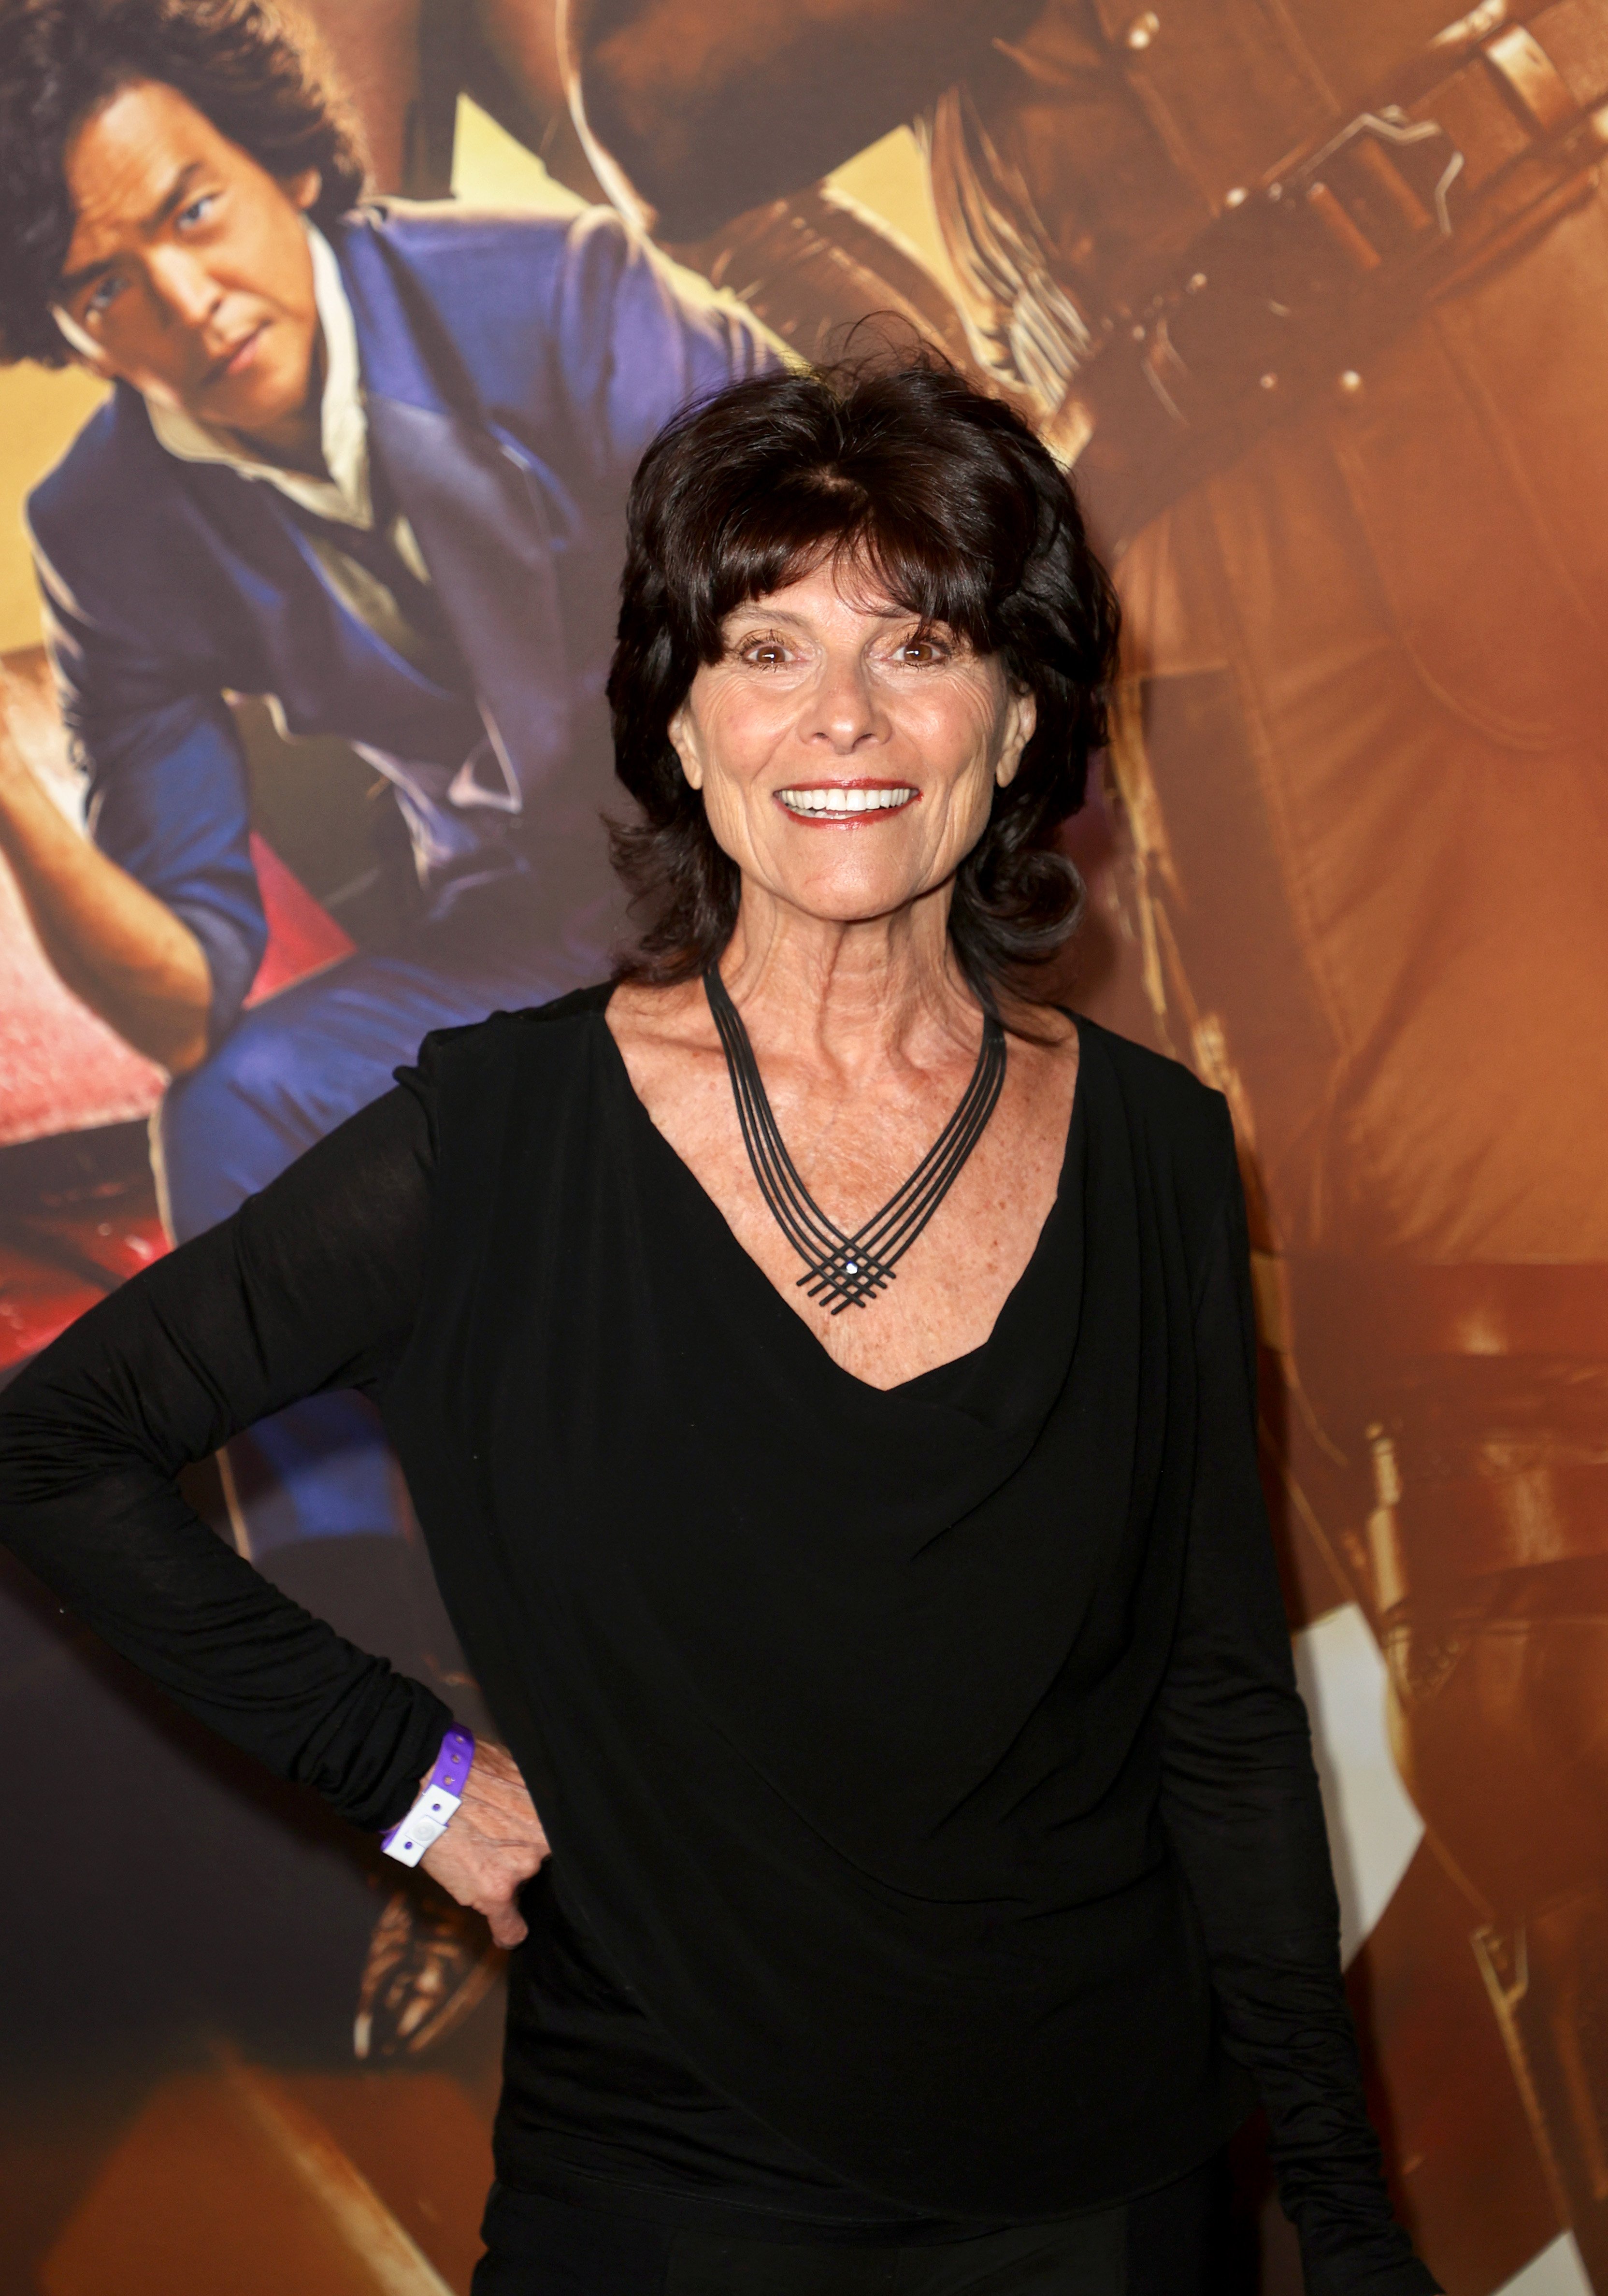 Adrienne Barbeau at the premiere of "Cowboy Bebop" on November 11, 2021 | Source: Getty Images